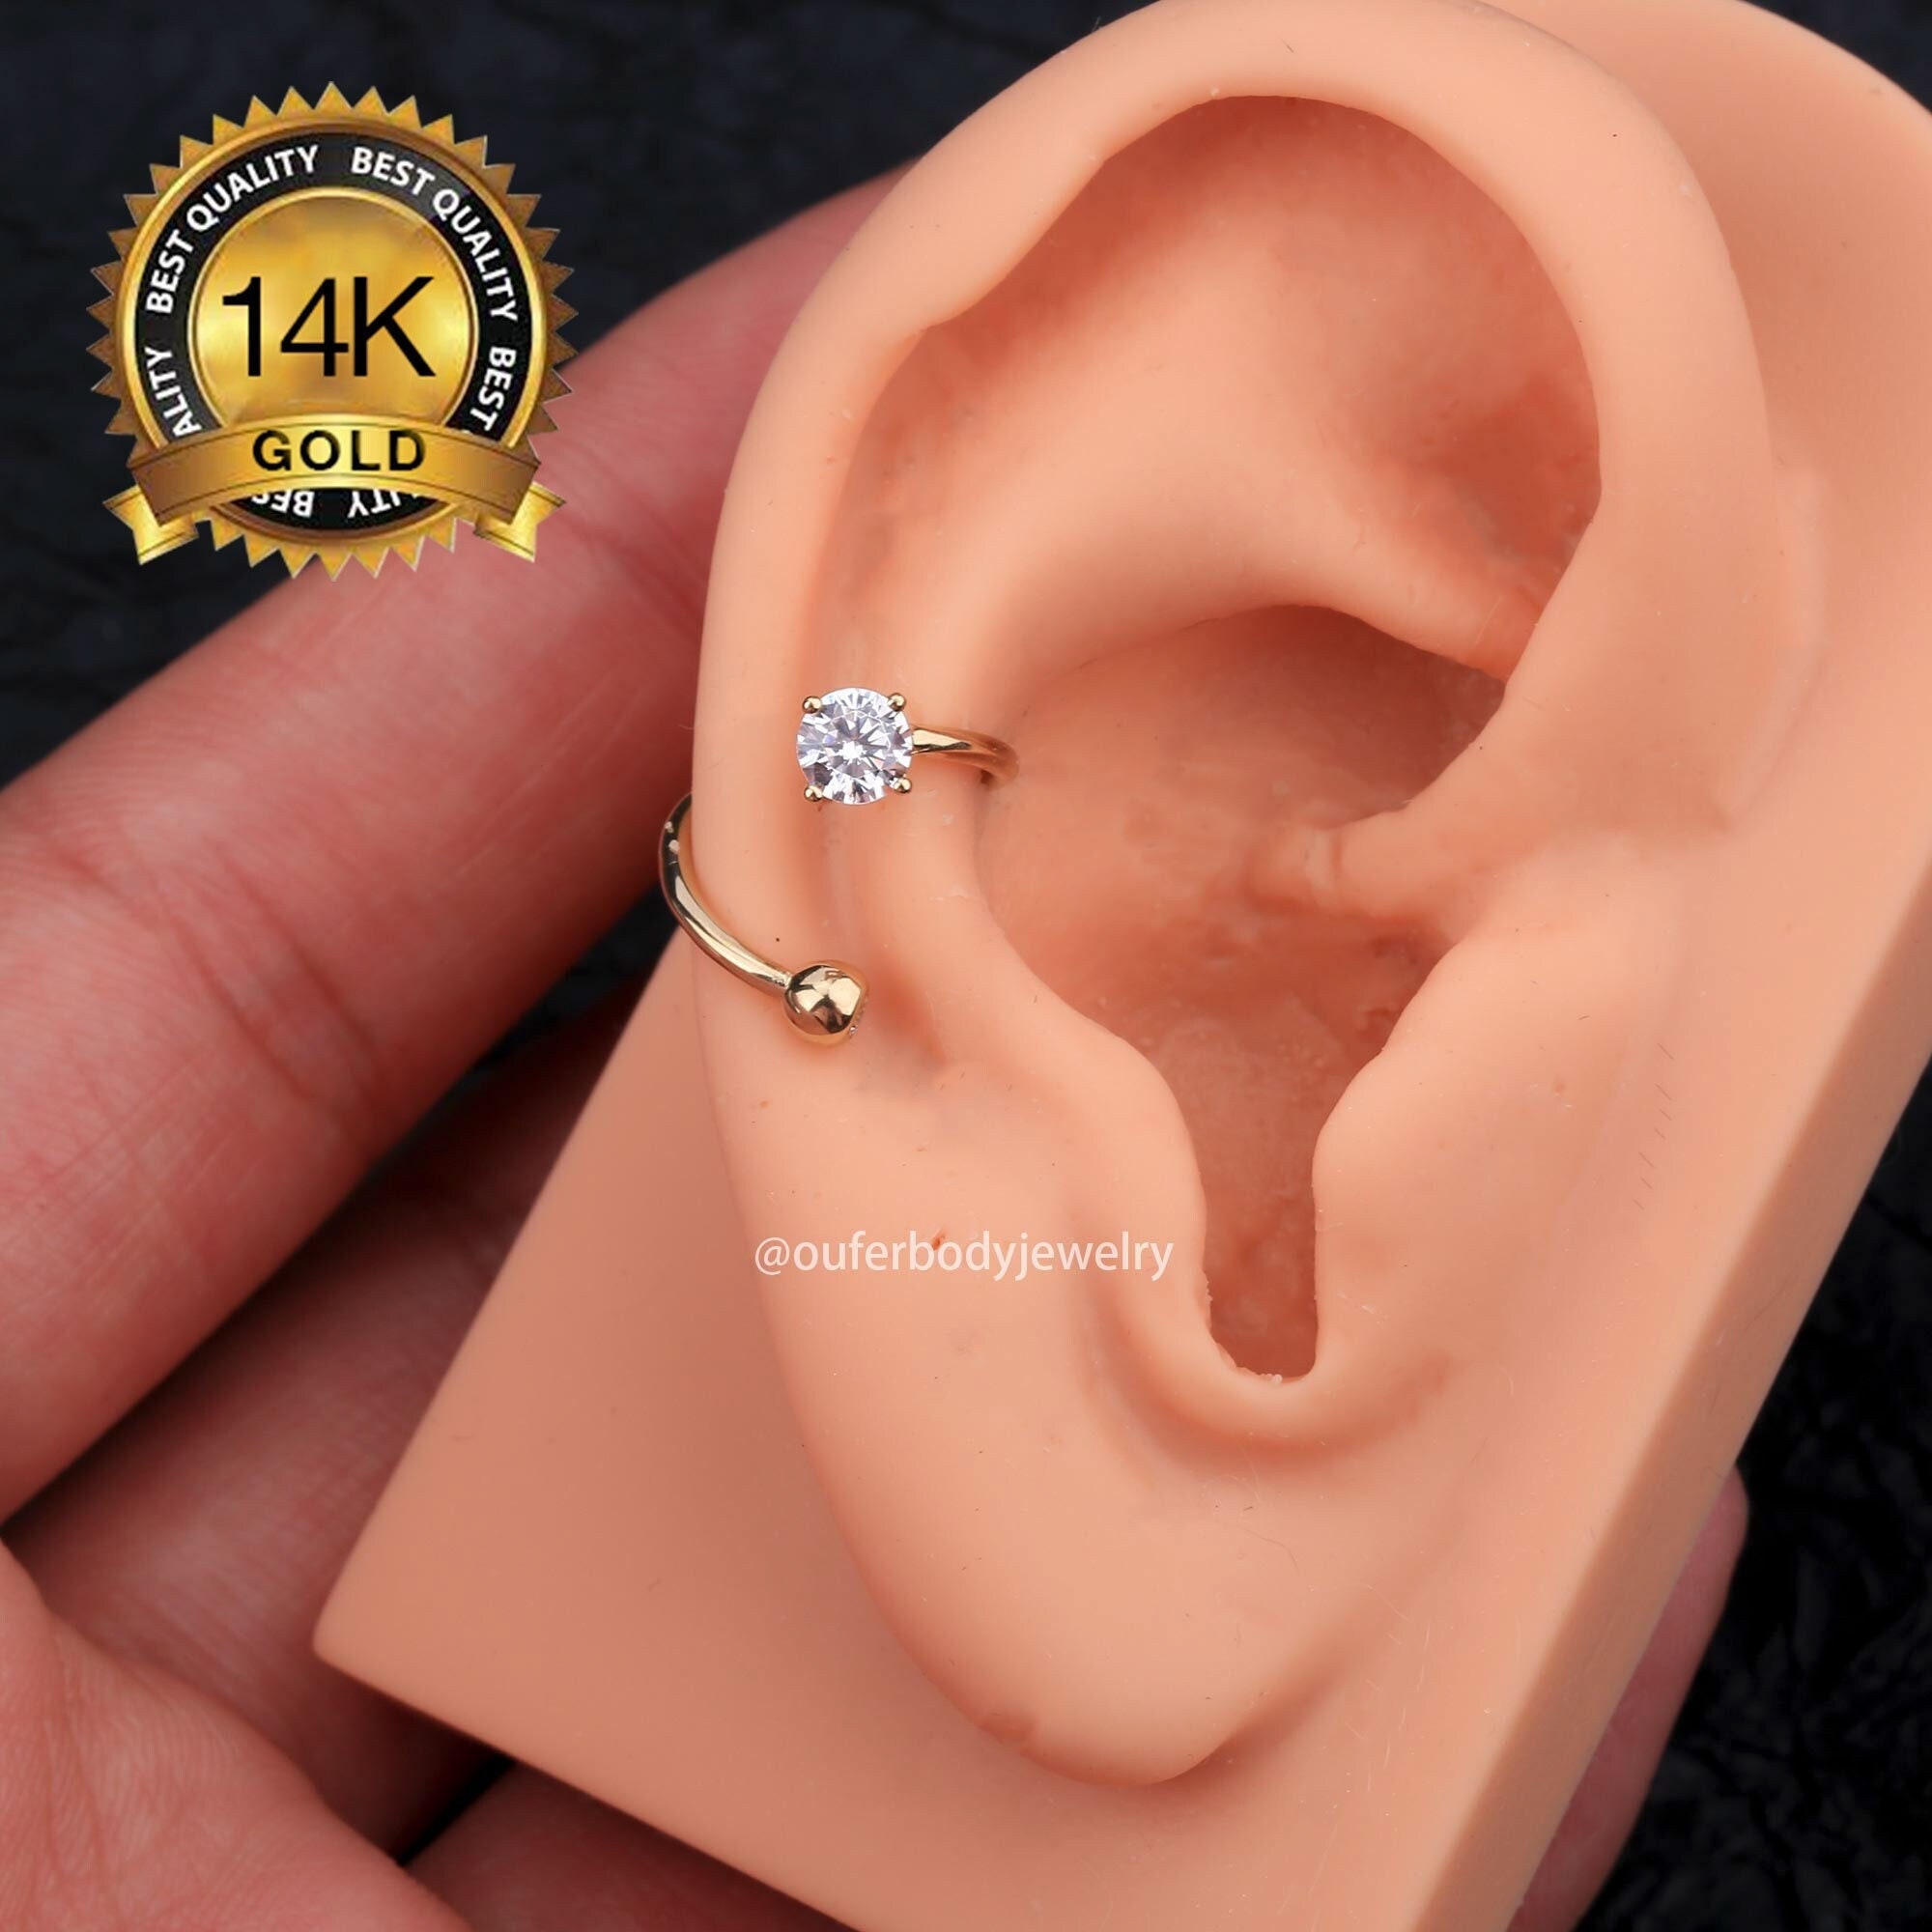 Spiral Helix Cartilage Earrings – Painful Pleasures